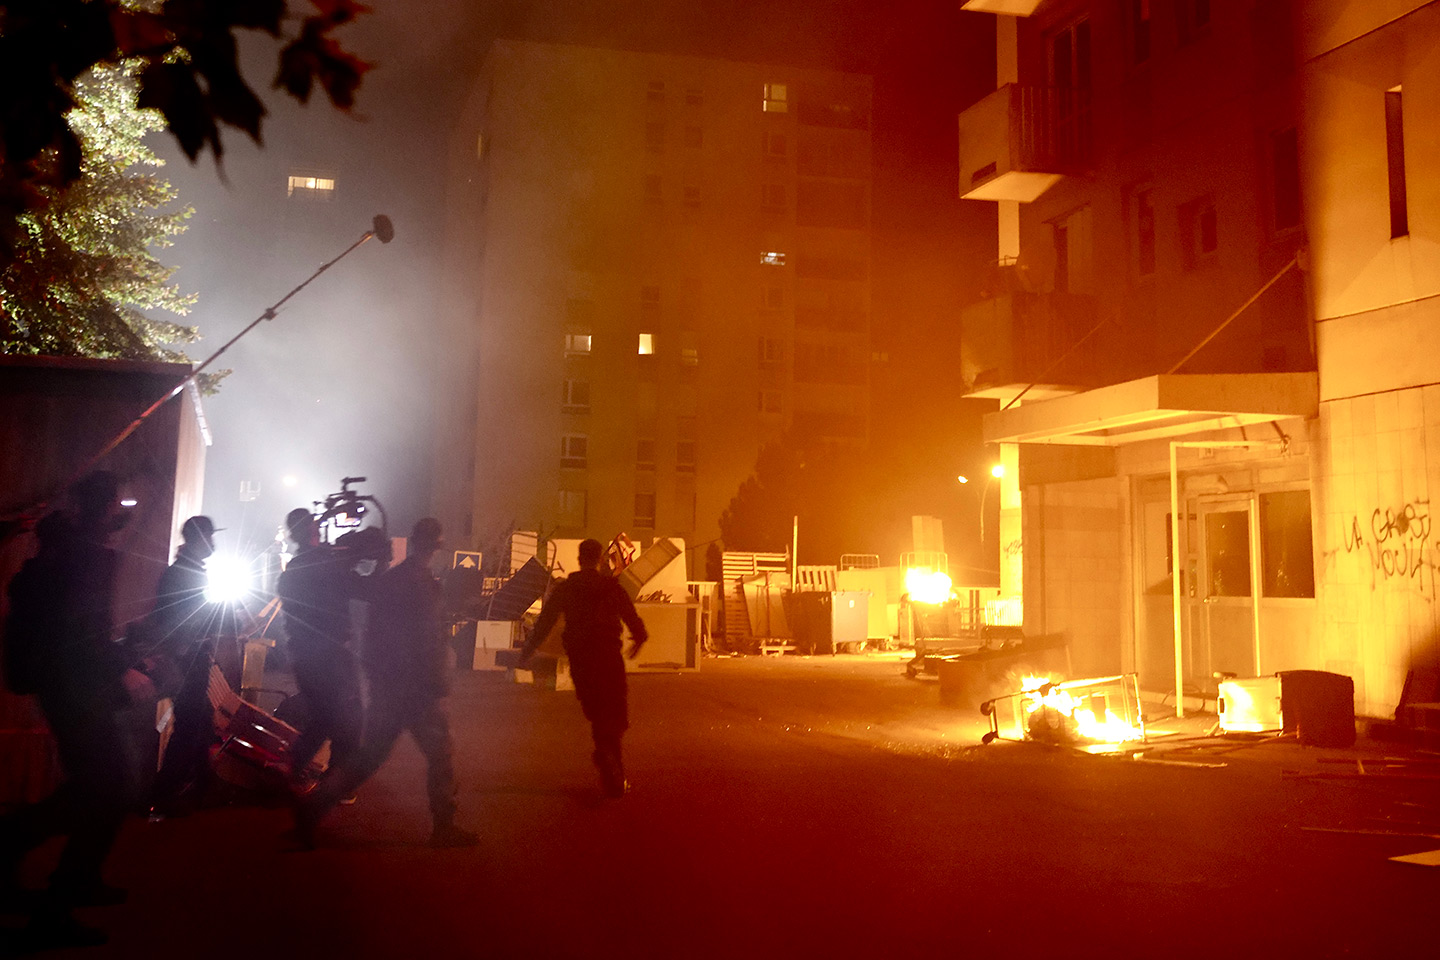 About the shooting of "Athena", a film by Romain Gavras